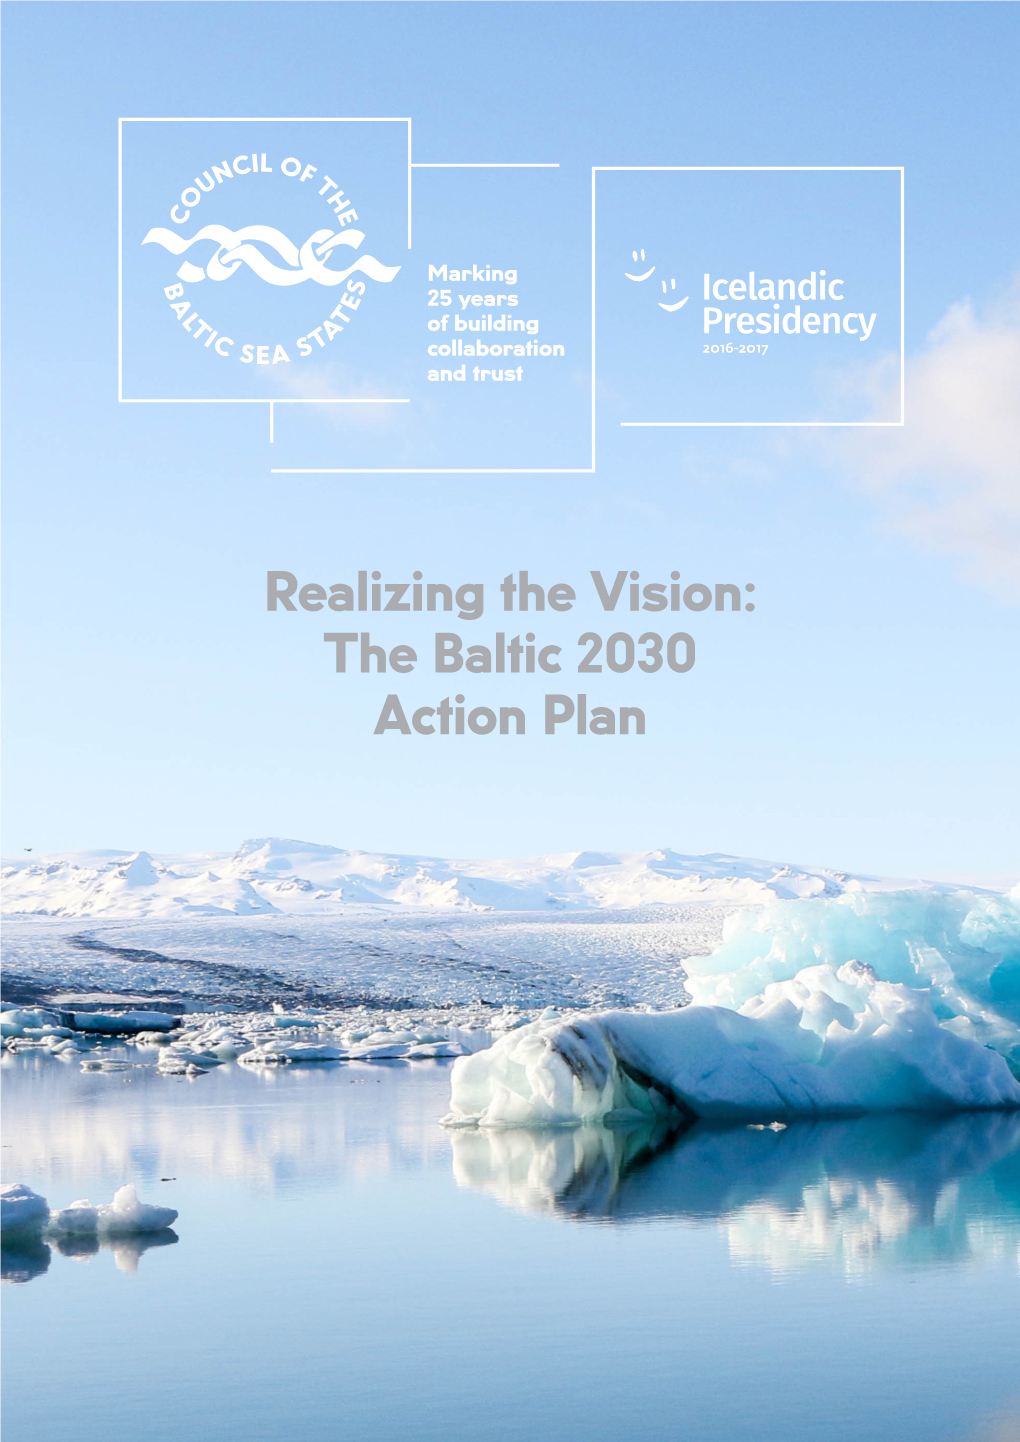 The Baltic 2030 Action Plan 2